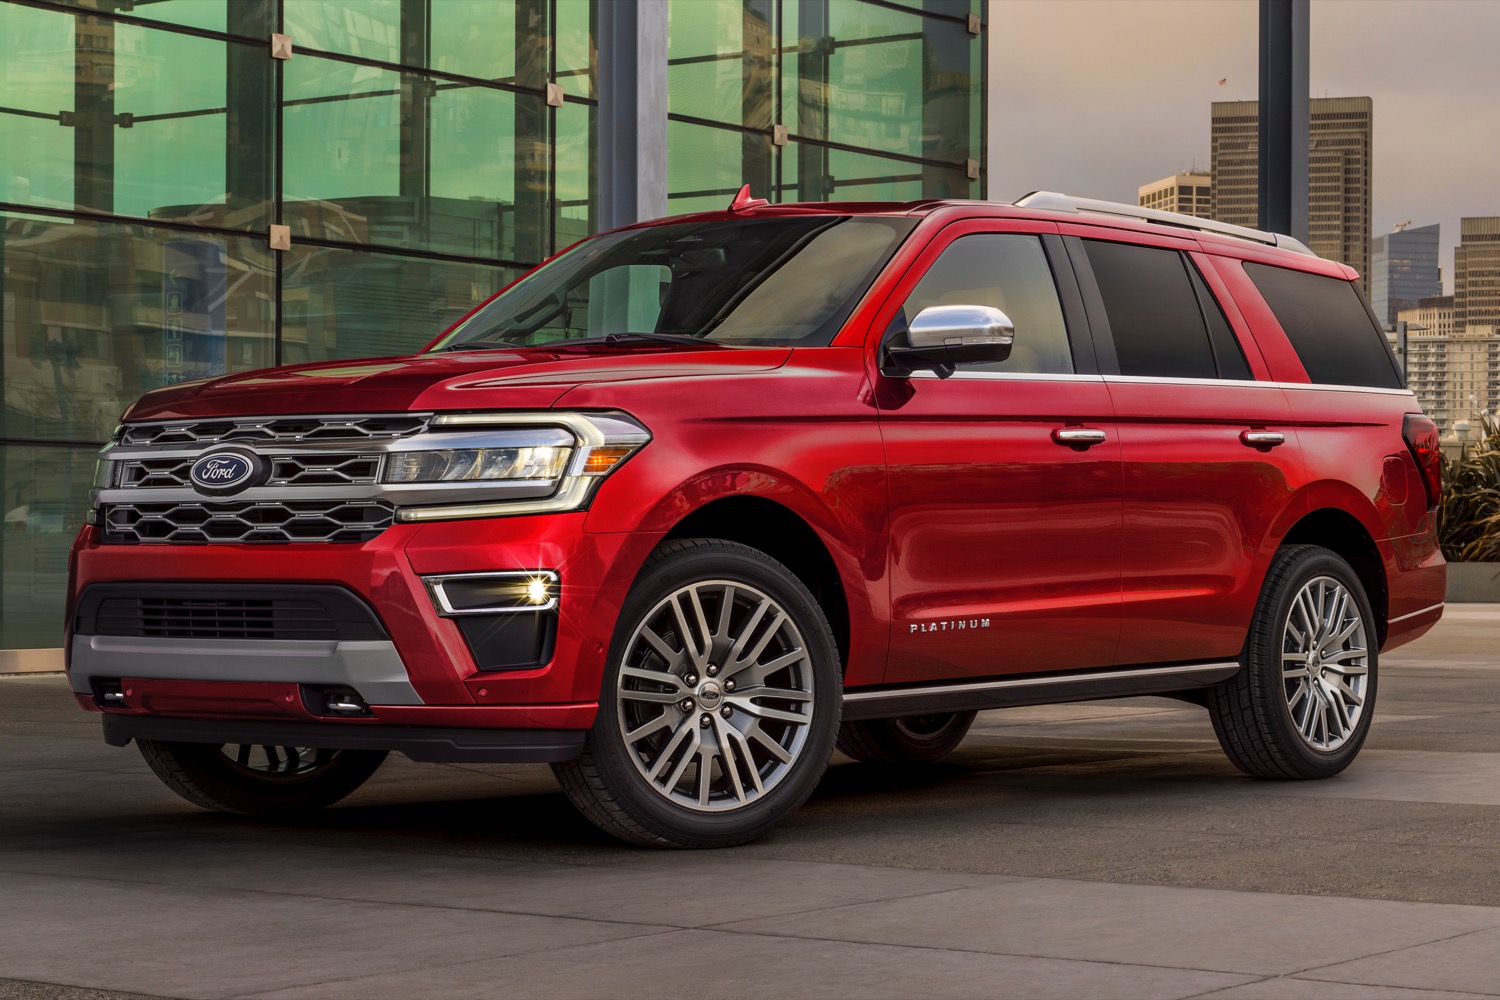 Ford Expedition Production Picked Up In August